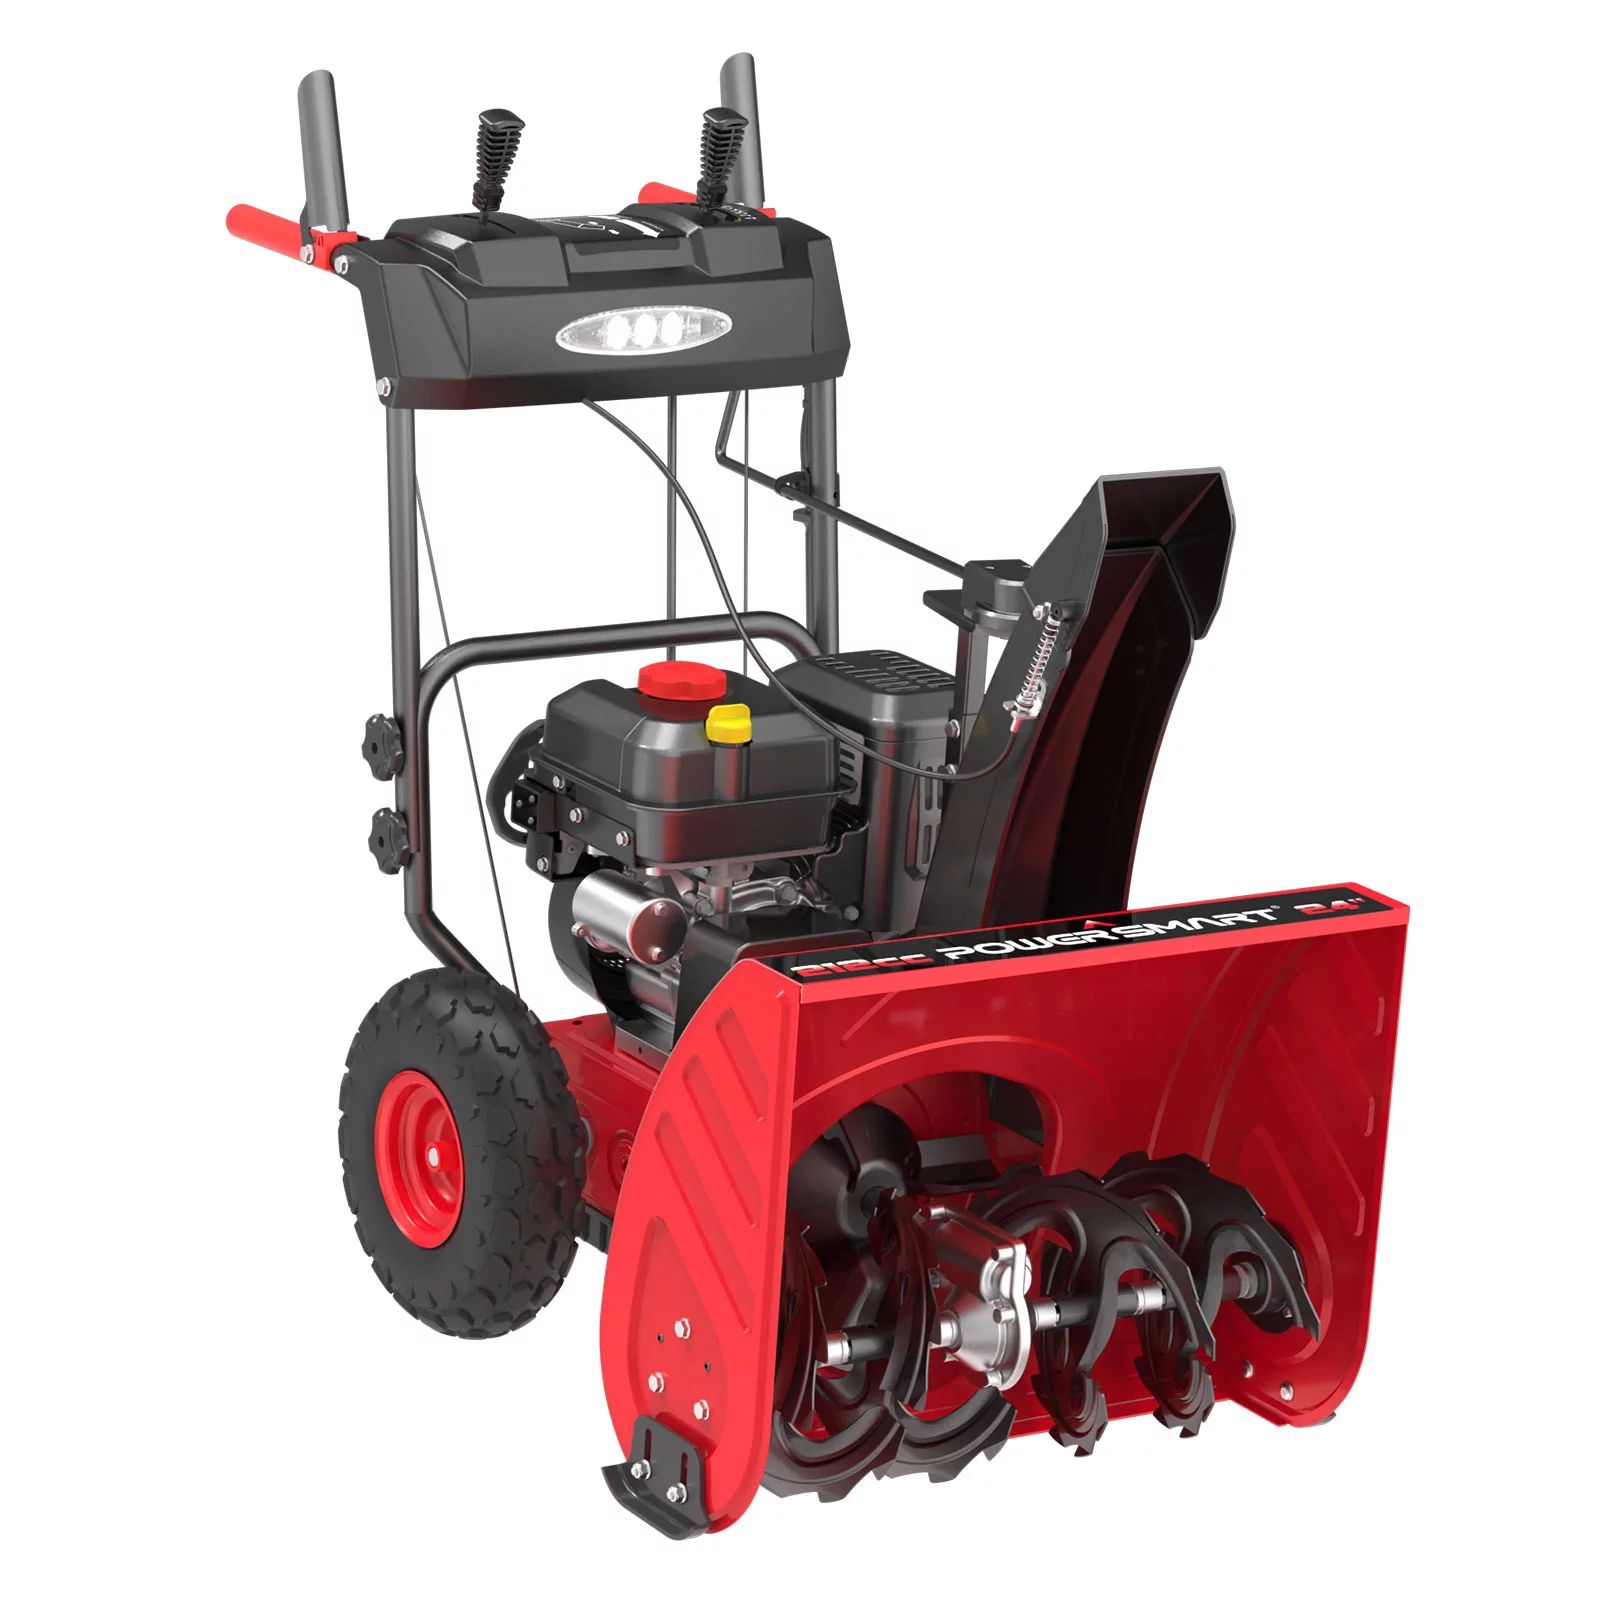 Powersmart 24 in. Two-Stage Electric Start 212CC Self Propelled Gas Snow Blower | Walmart (US)